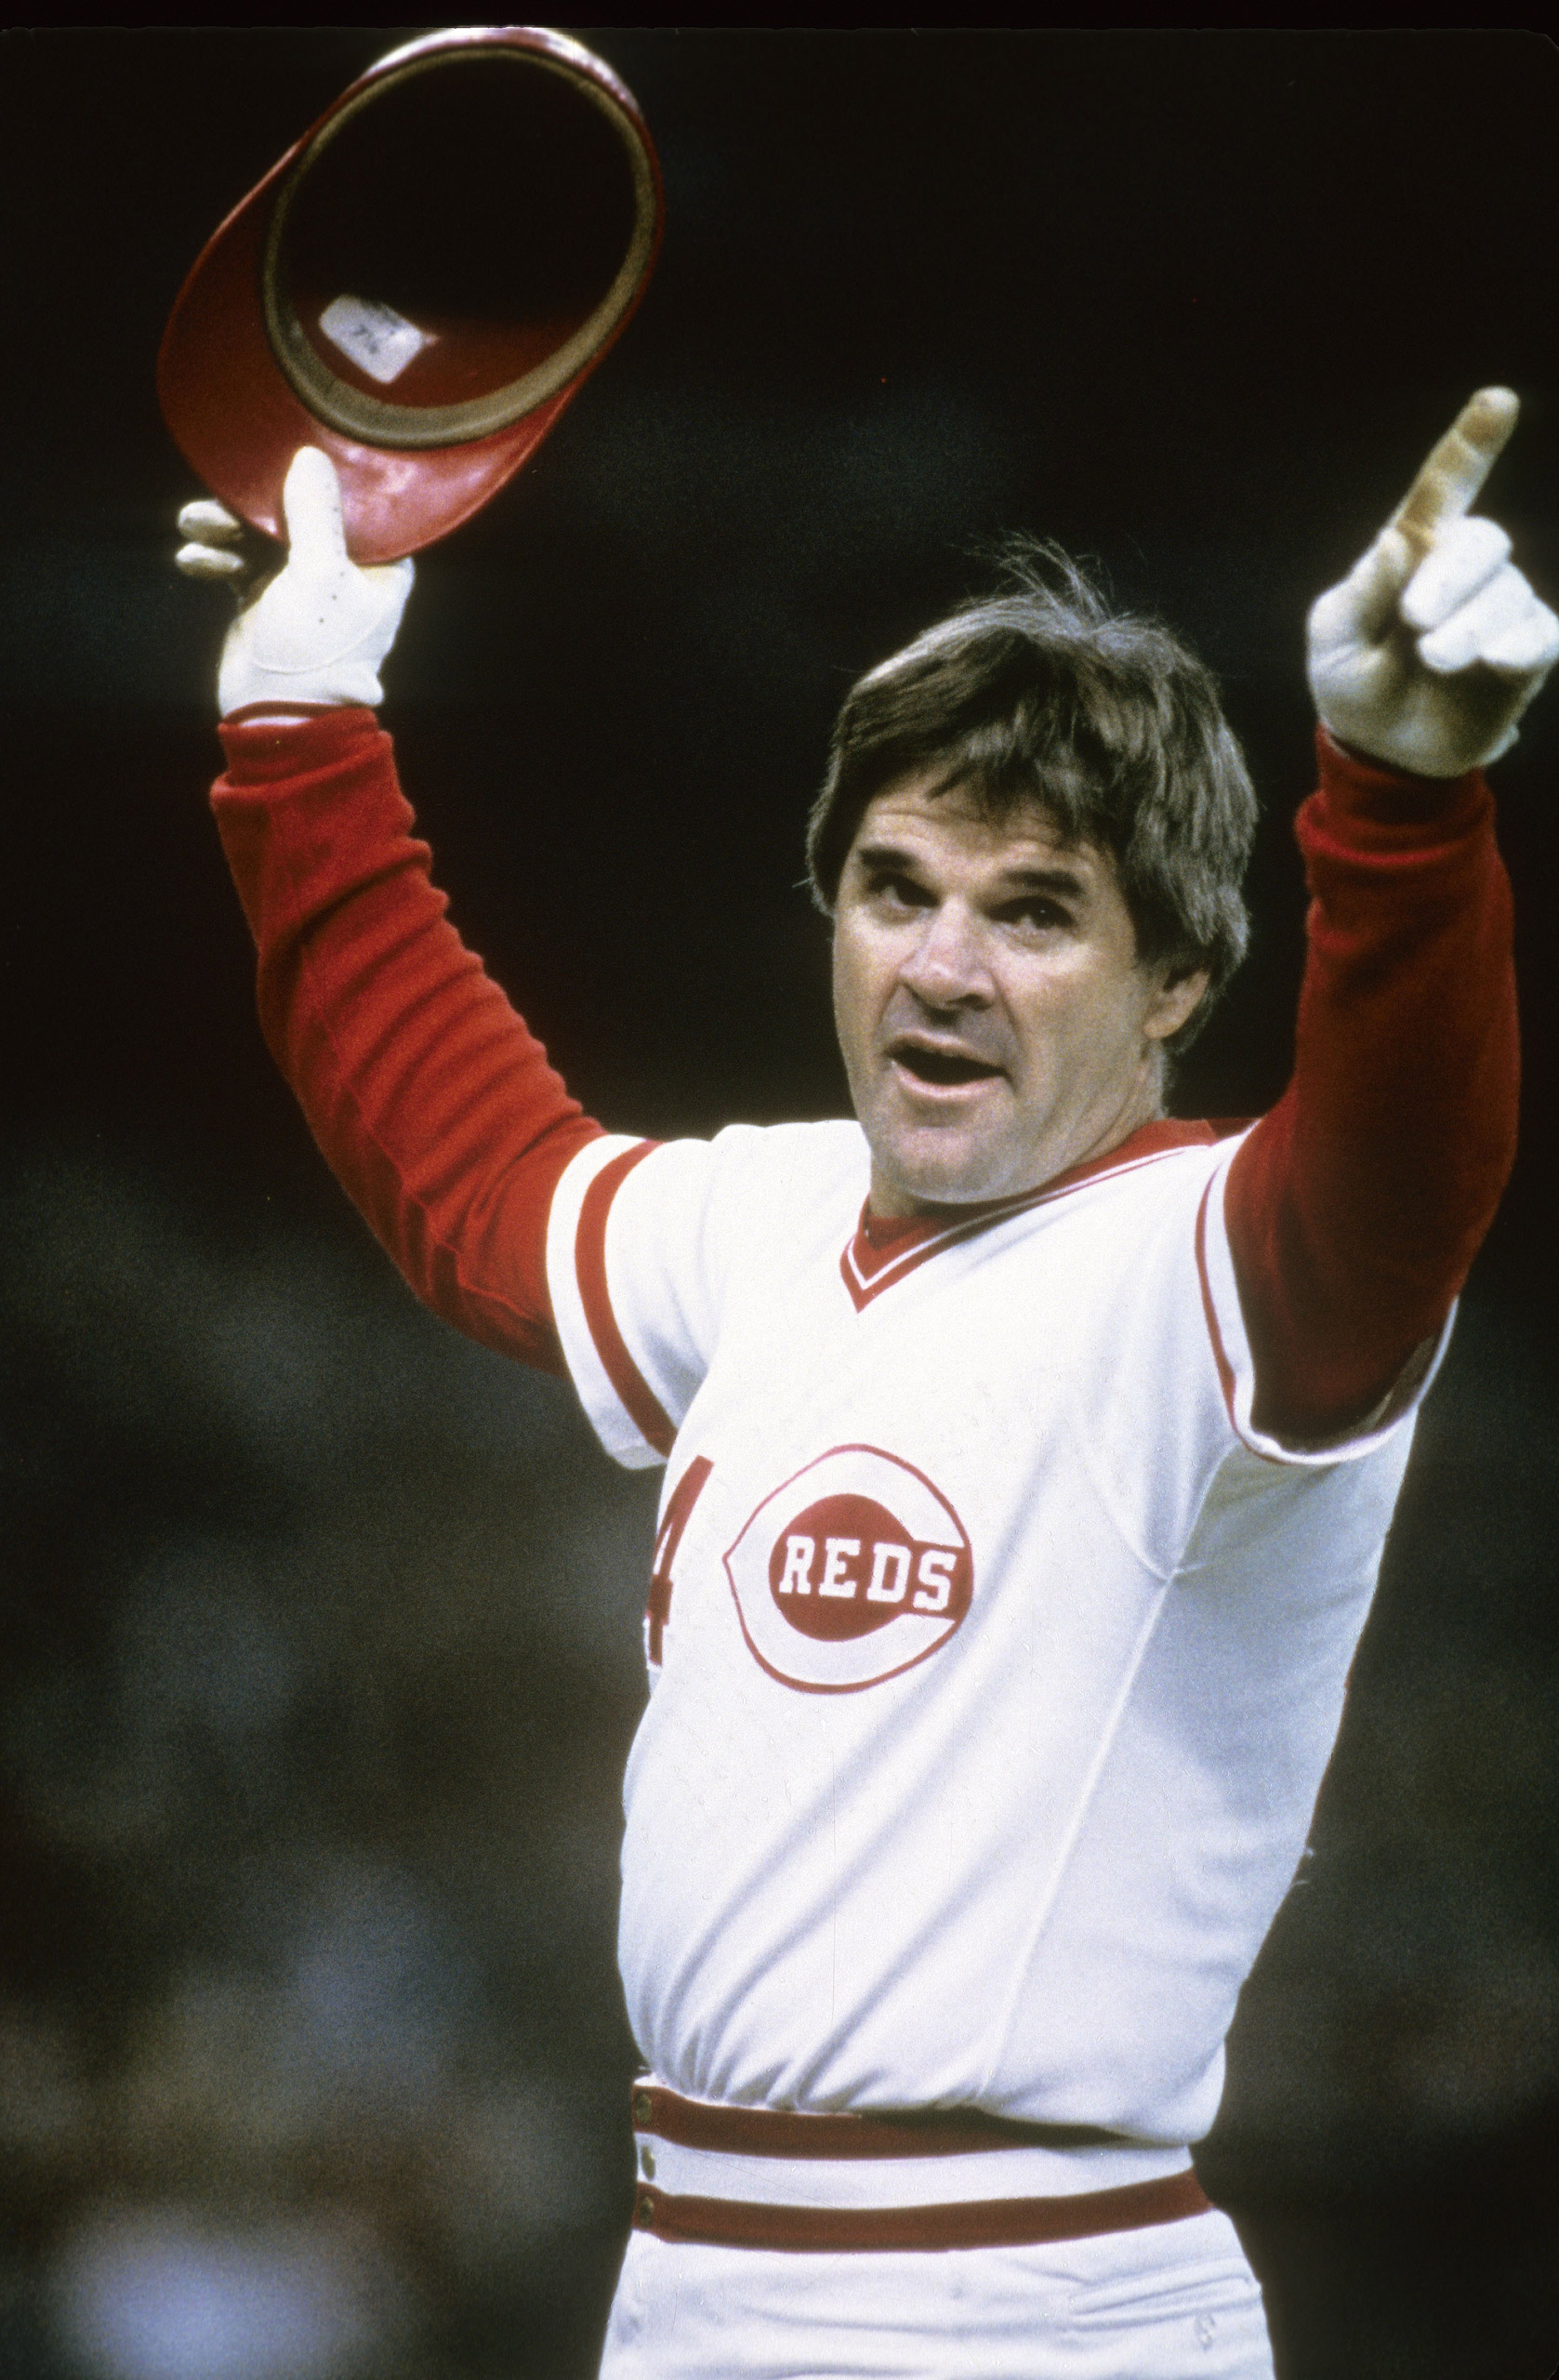 Pete Rose Breaks Baseball's All Time Hit Record: See Photo